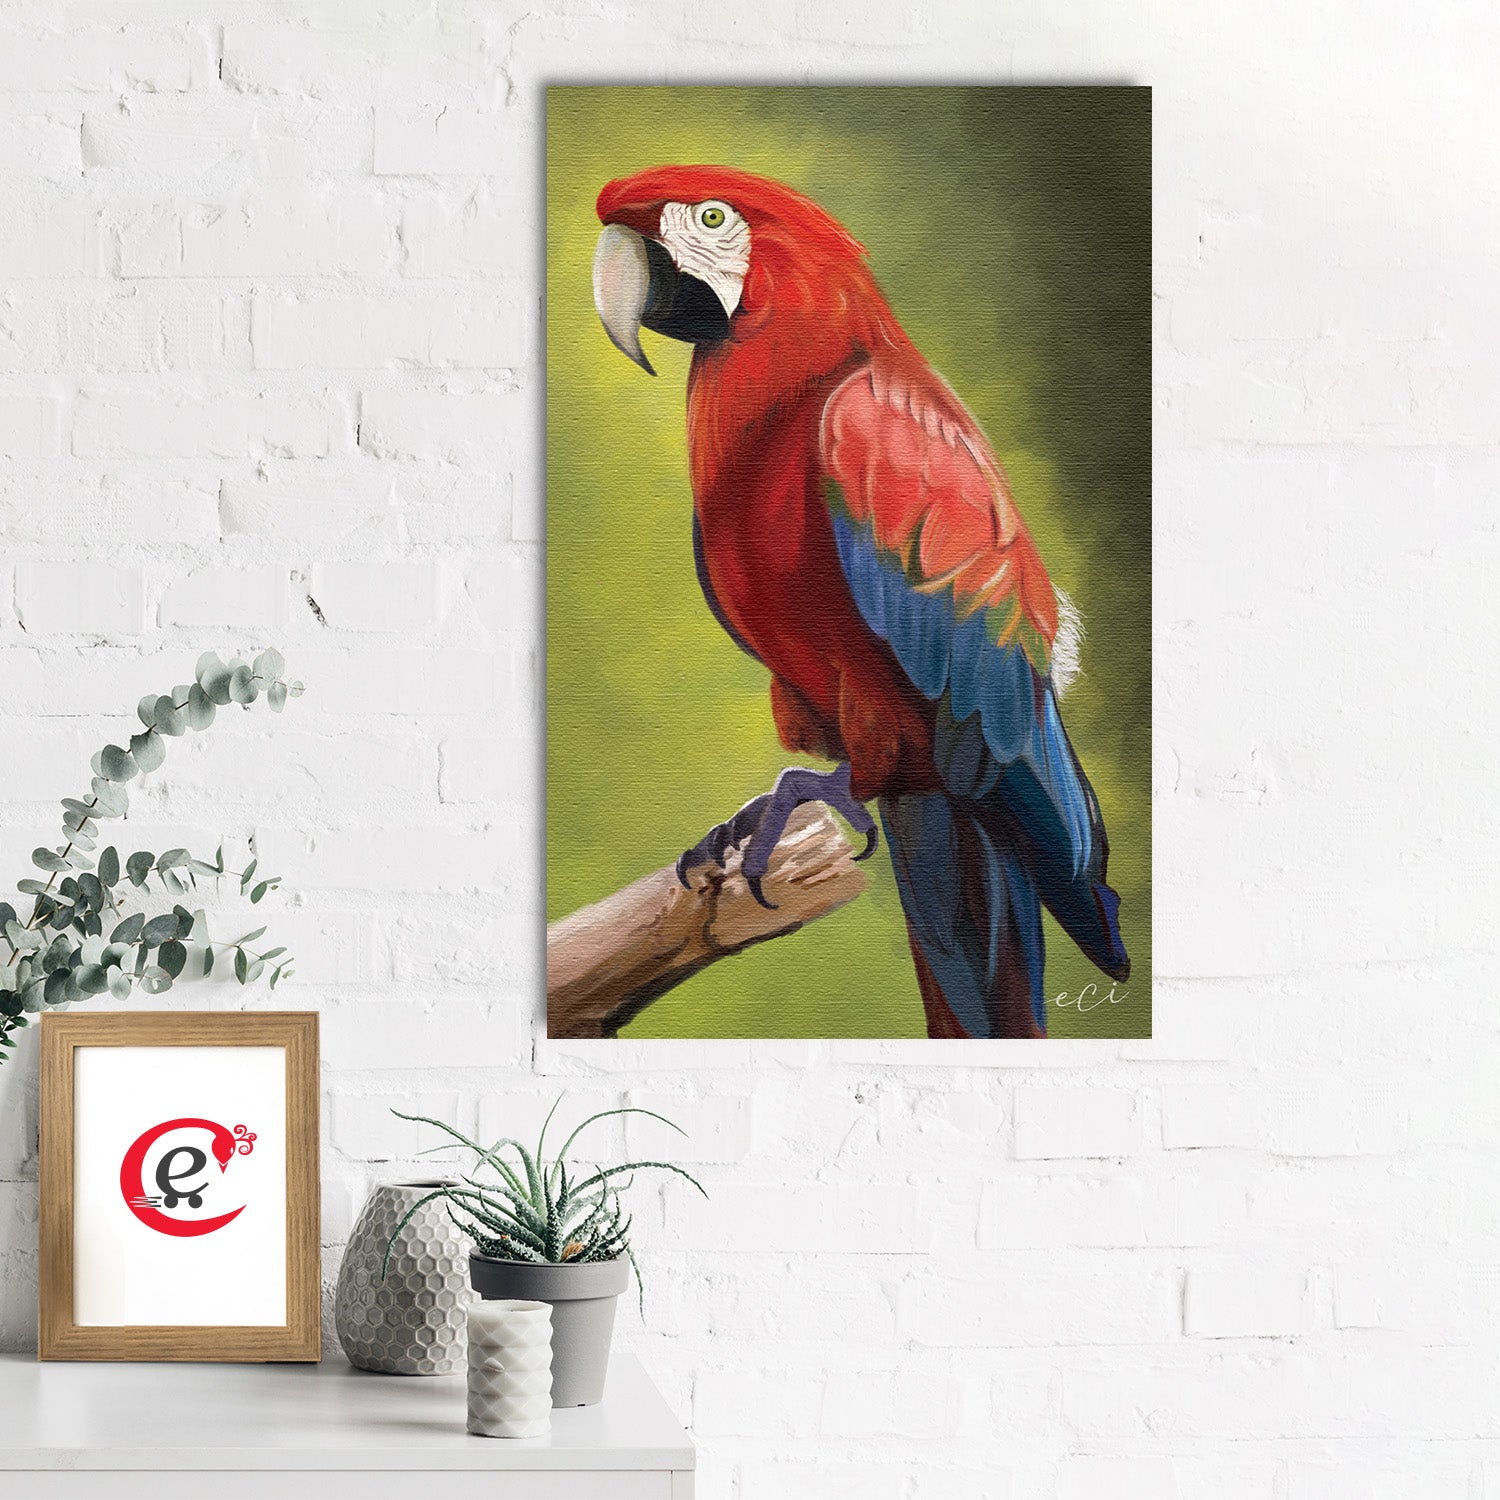 Parrot On Tree Branch Canvas Painting Digital Printed Bird Wall Art 1